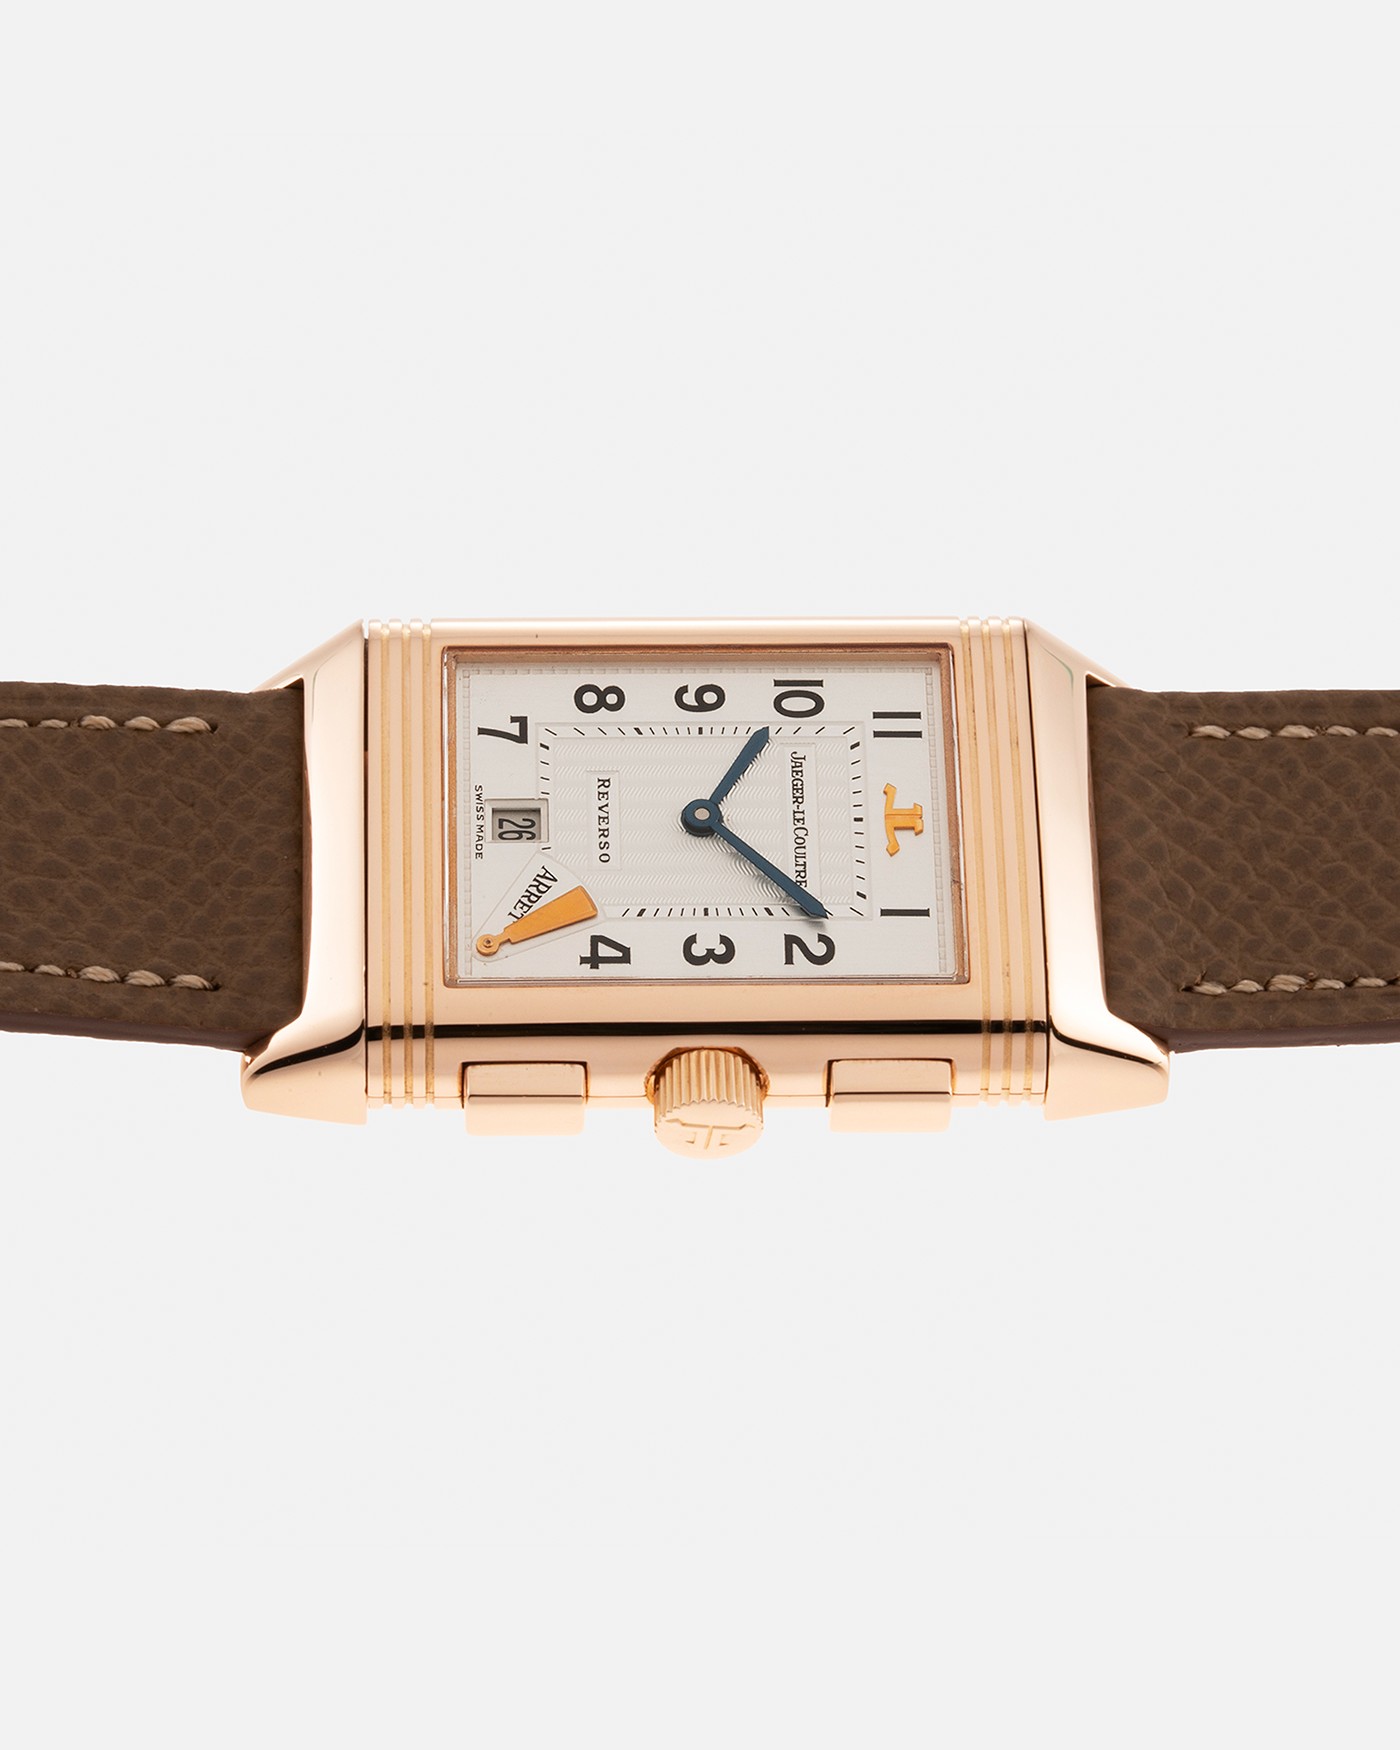 Brand: Jaeger LeCoultre Year: 1996 Model: Reverso Chronographe Retrograde, BALE Prototype of 20 pieces Reference Number: 270.2.69 Serial Number: BALE 96/16 Material: 18-carat Rose Gold Movement: JLC Cal. 829, Manual-Wind Case Diameter: 42mm x 26mm x 9.5mm Lug Width: 19mm Strap: Nostime Taupe Leather Strap with Signed 18-carat Rose Gold Deployant Clasp